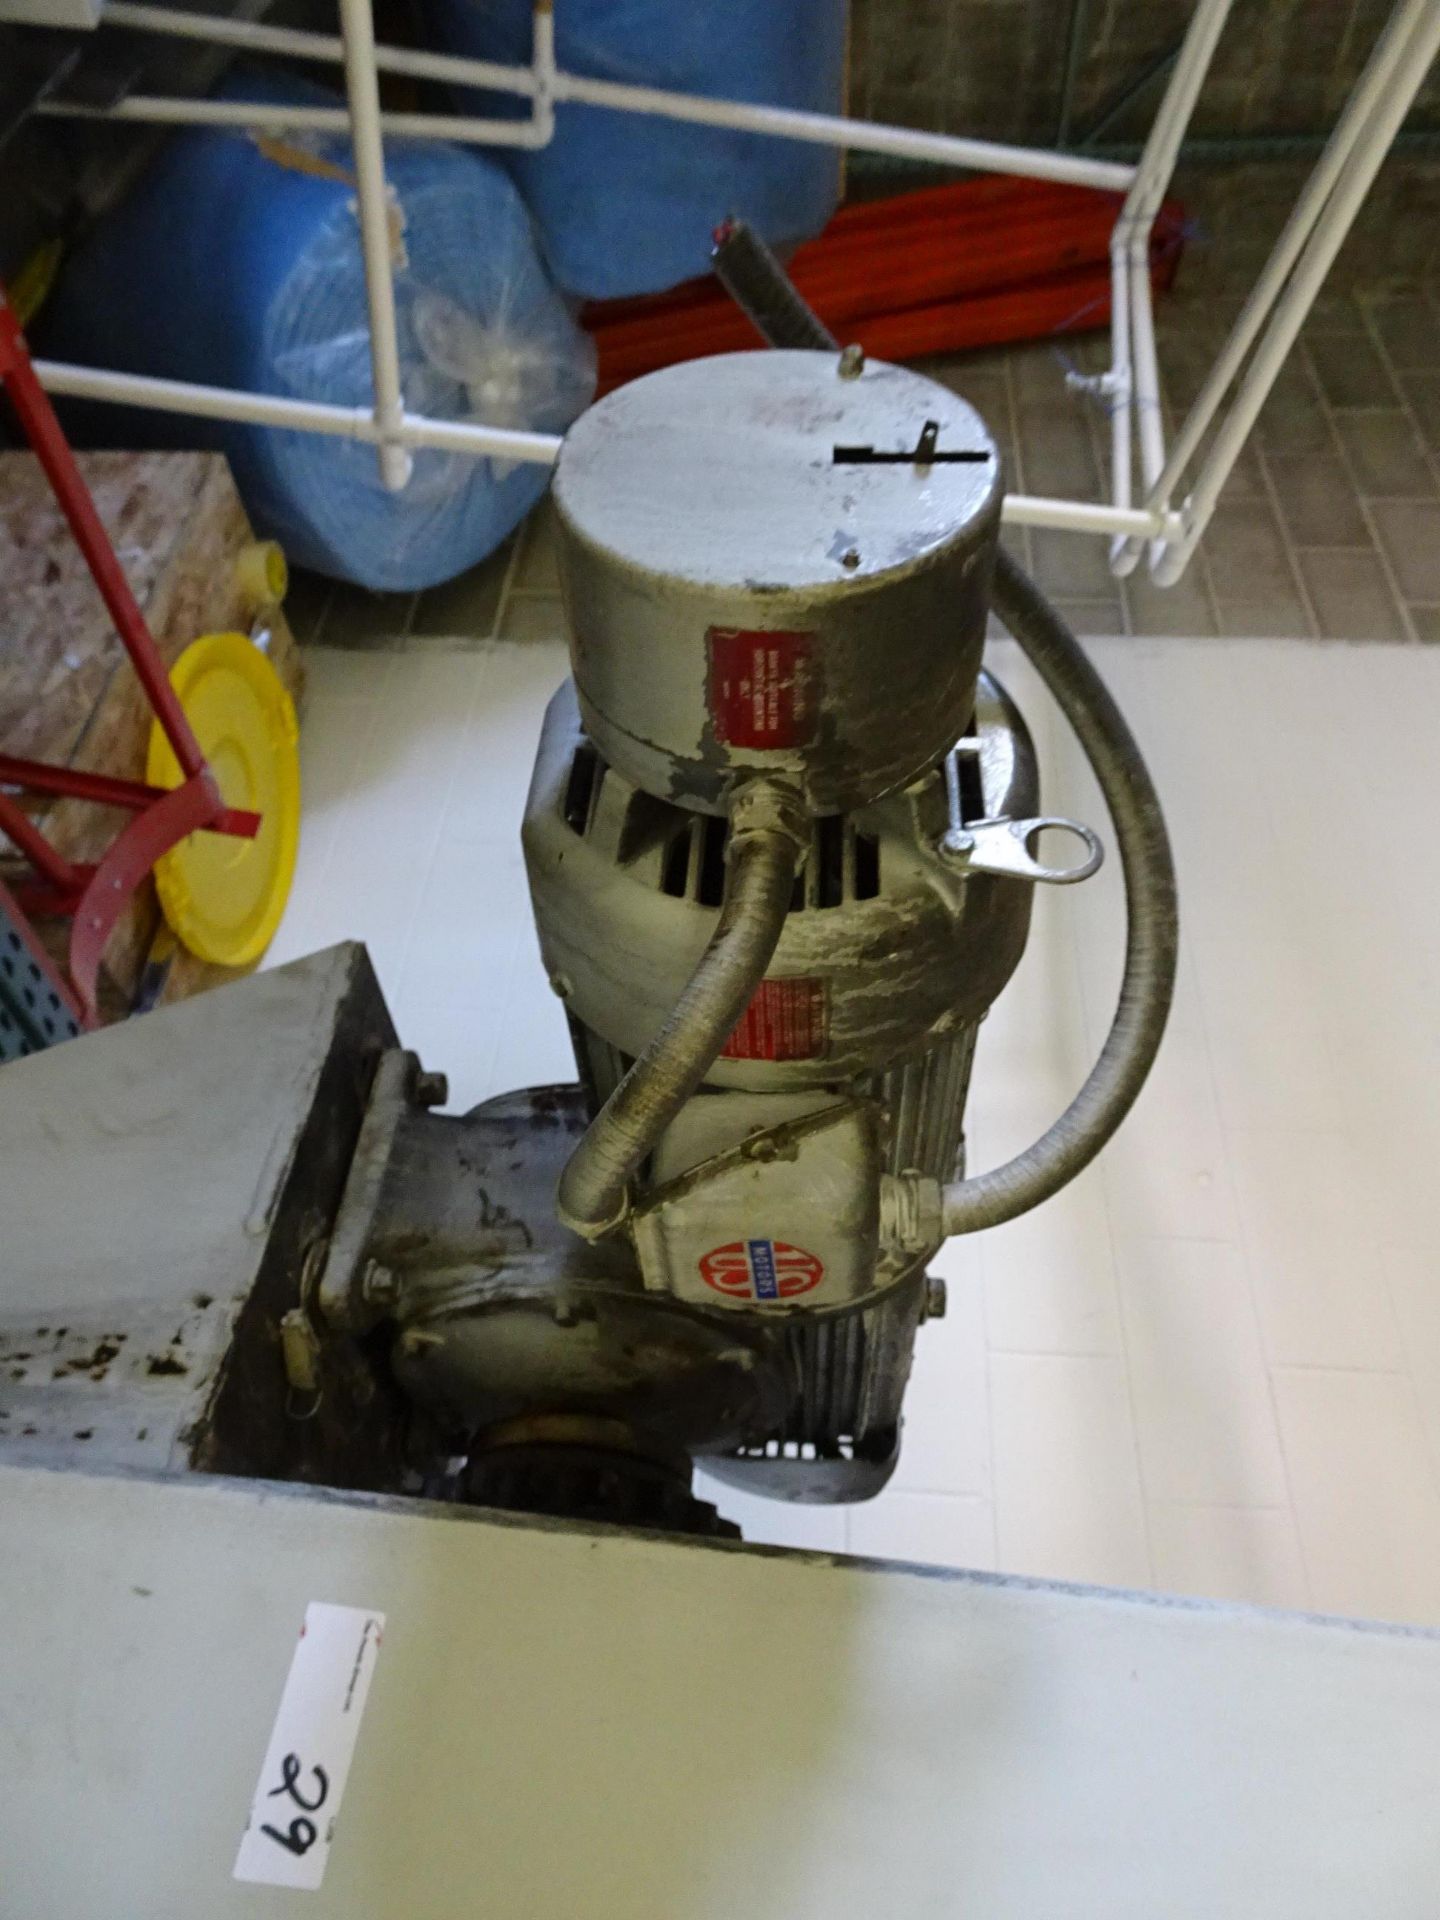 Approximately 50 Cubic Foot V-Shaped Vertical Blender. Please Note Disassembled To Bring Into - Image 3 of 6